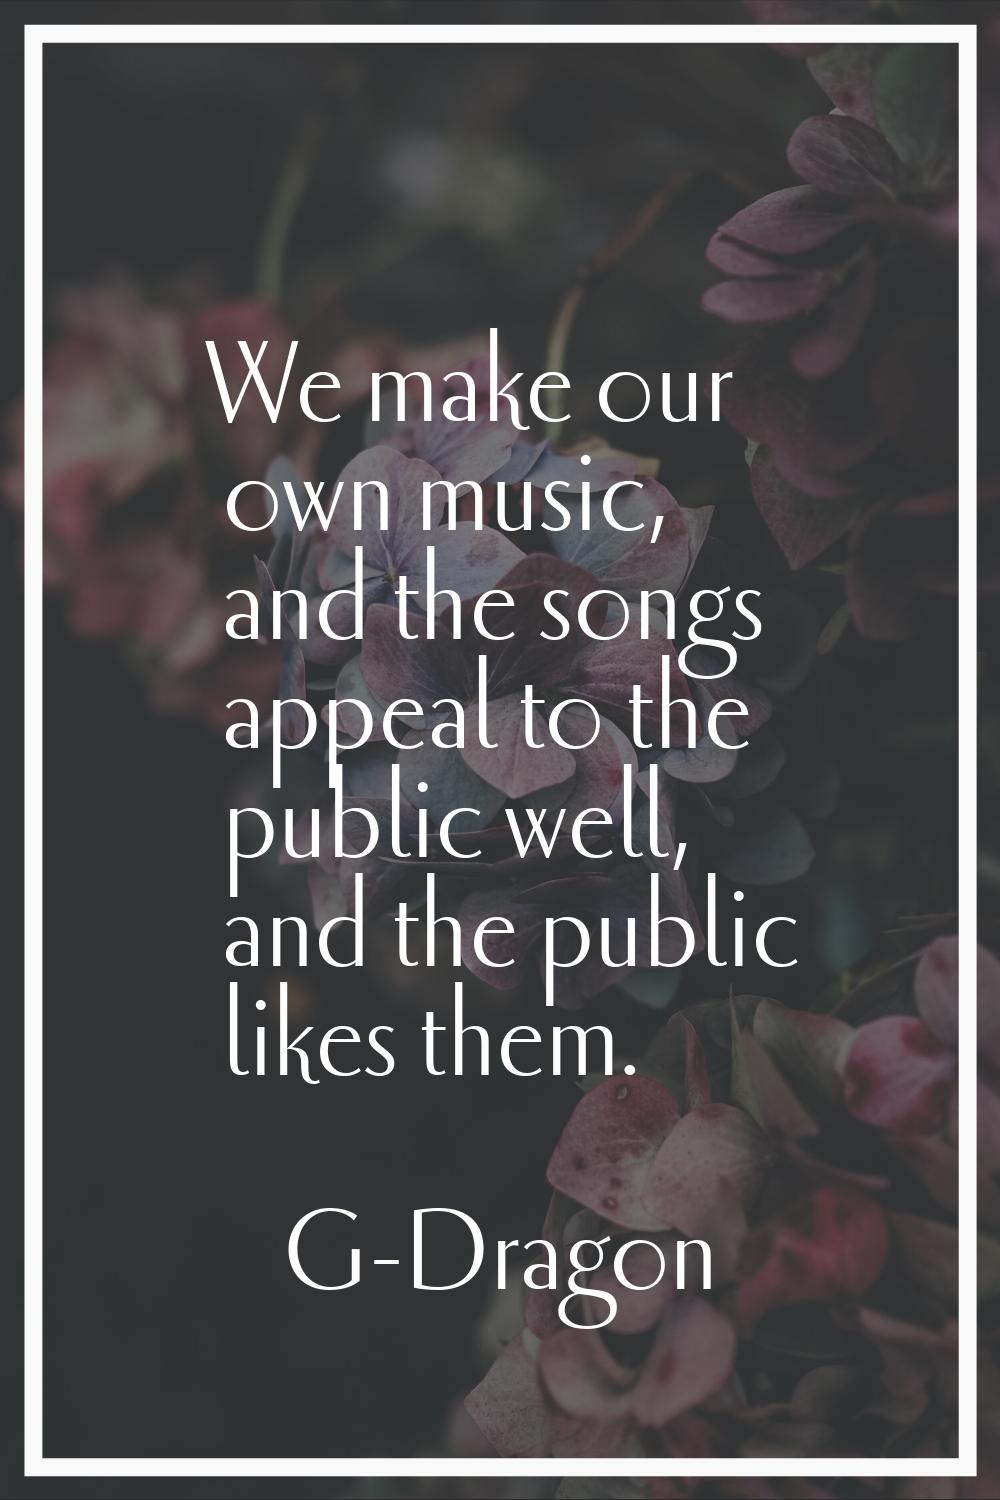 We make our own music, and the songs appeal to the public well, and the public likes them.